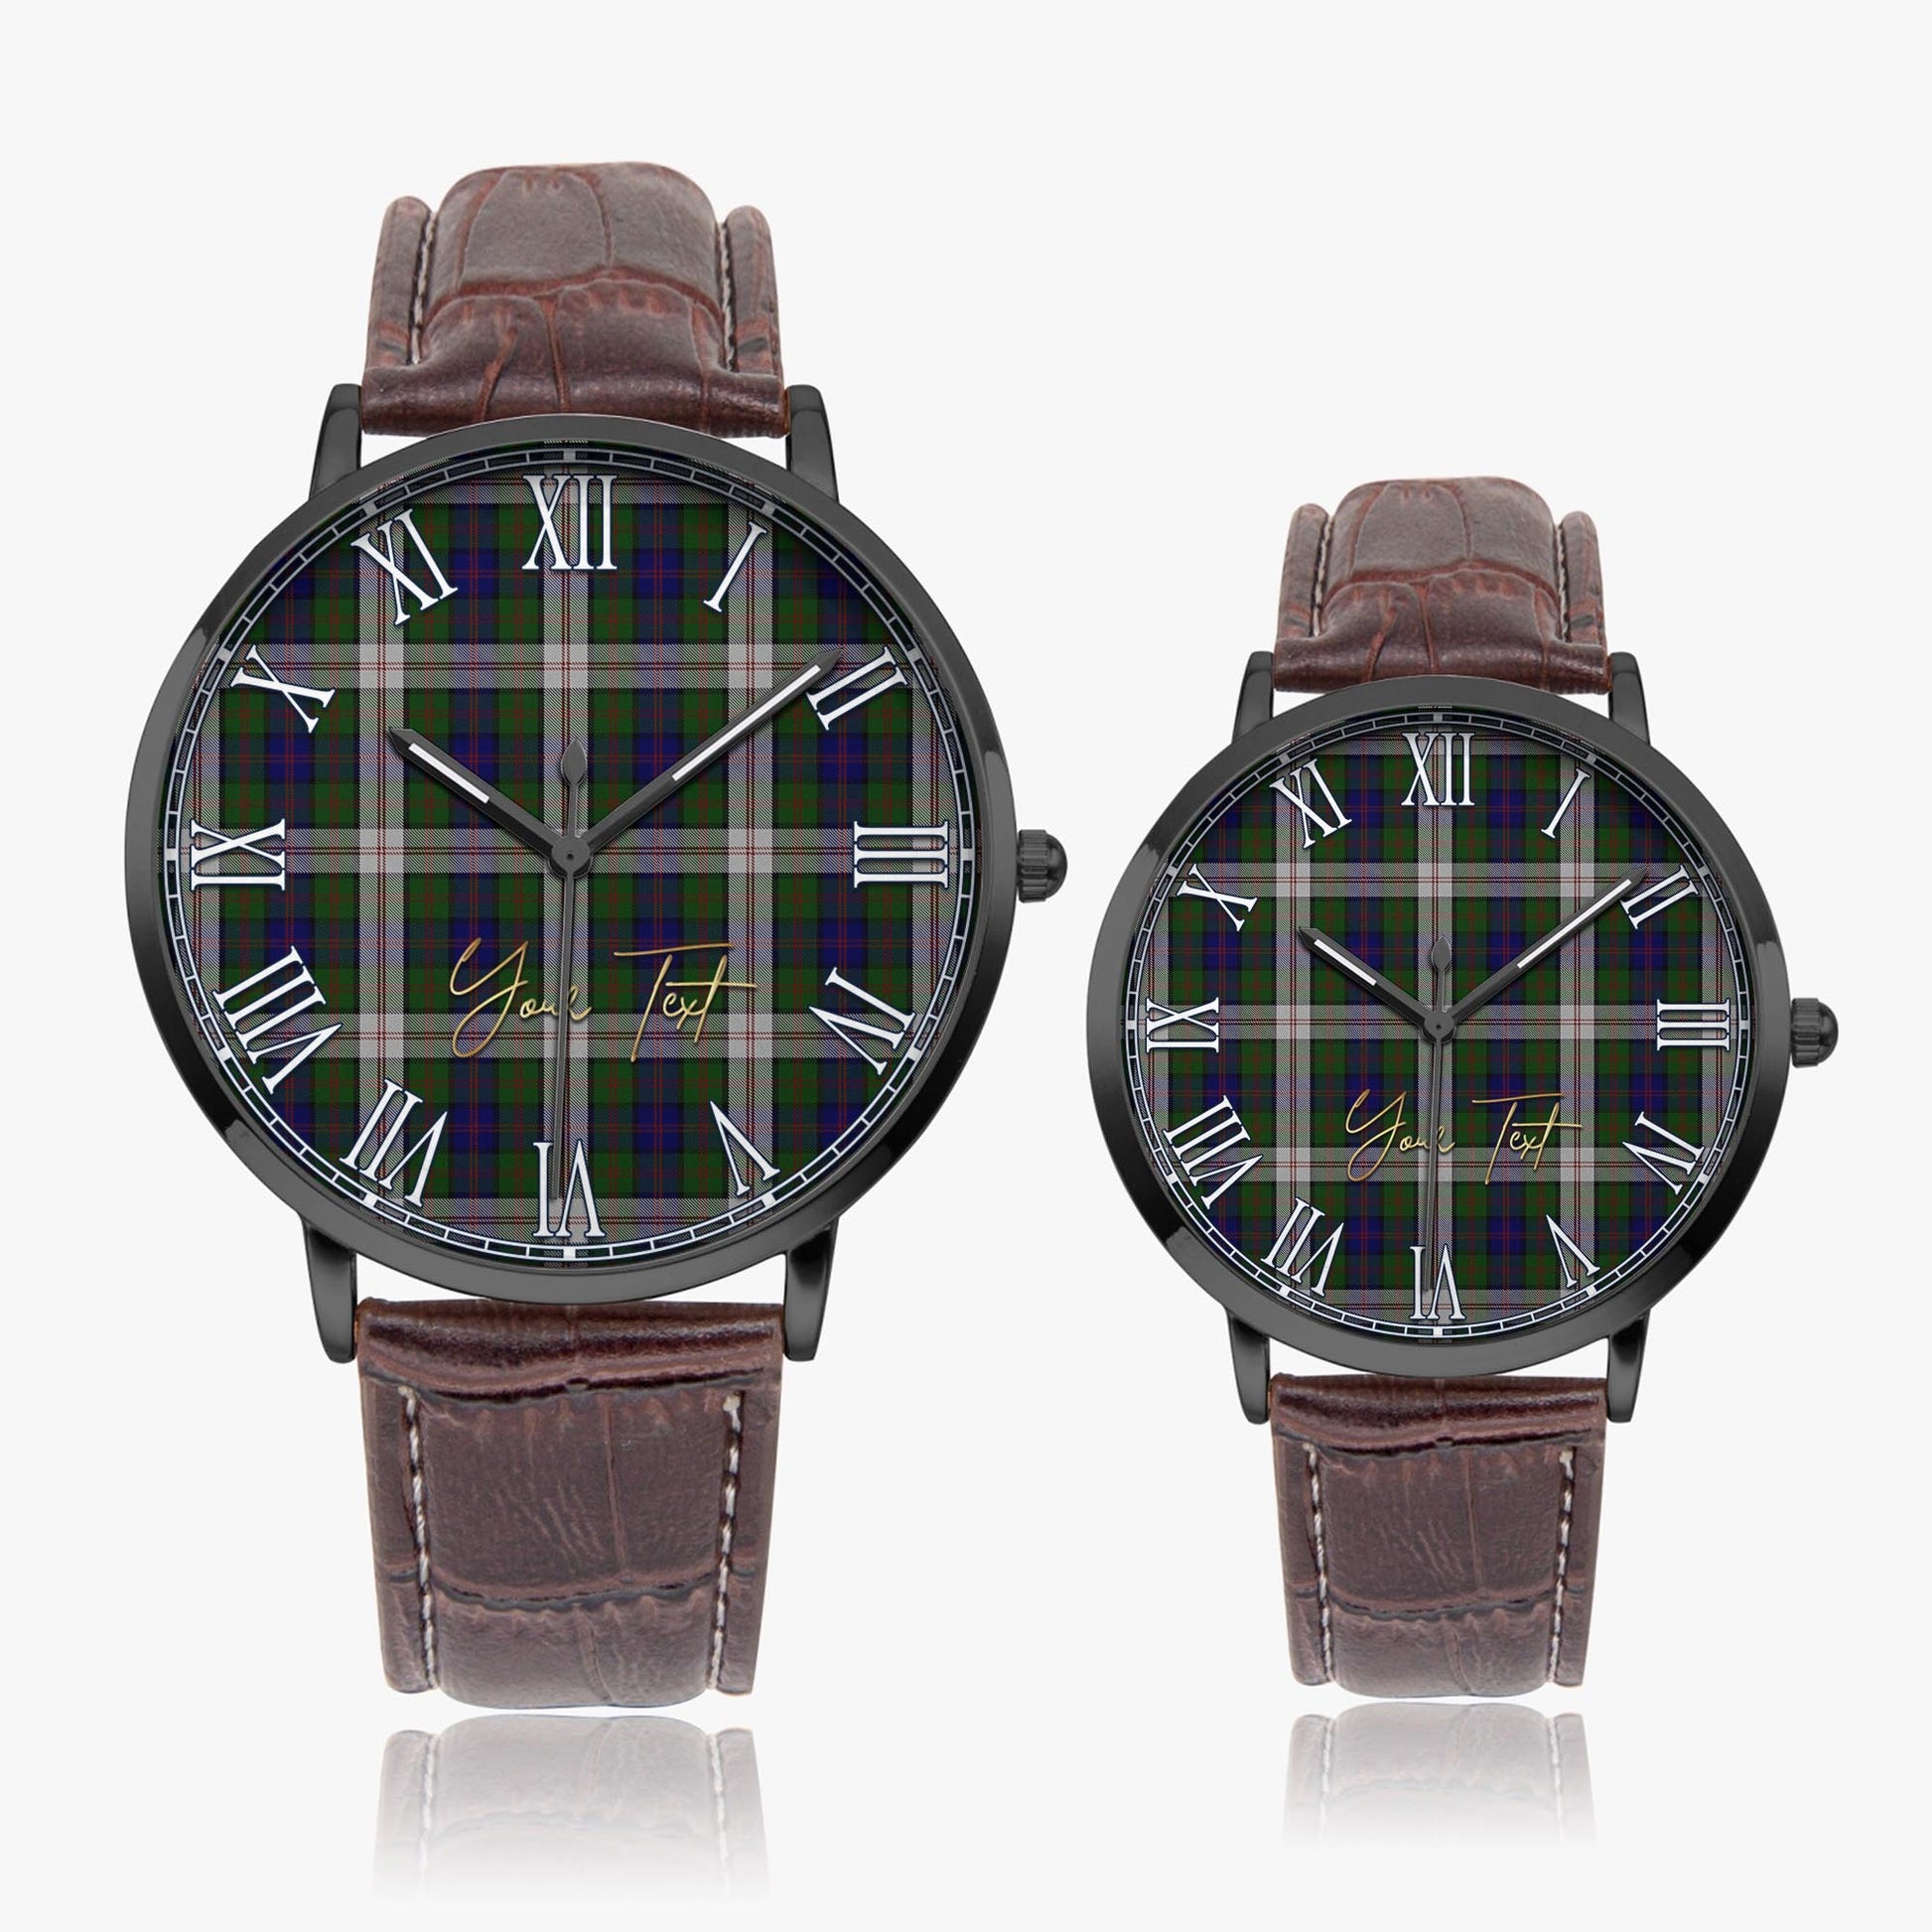 Blair Dress Tartan Personalized Your Text Leather Trap Quartz Watch Ultra Thin Black Case With Brown Leather Strap - Tartanvibesclothing